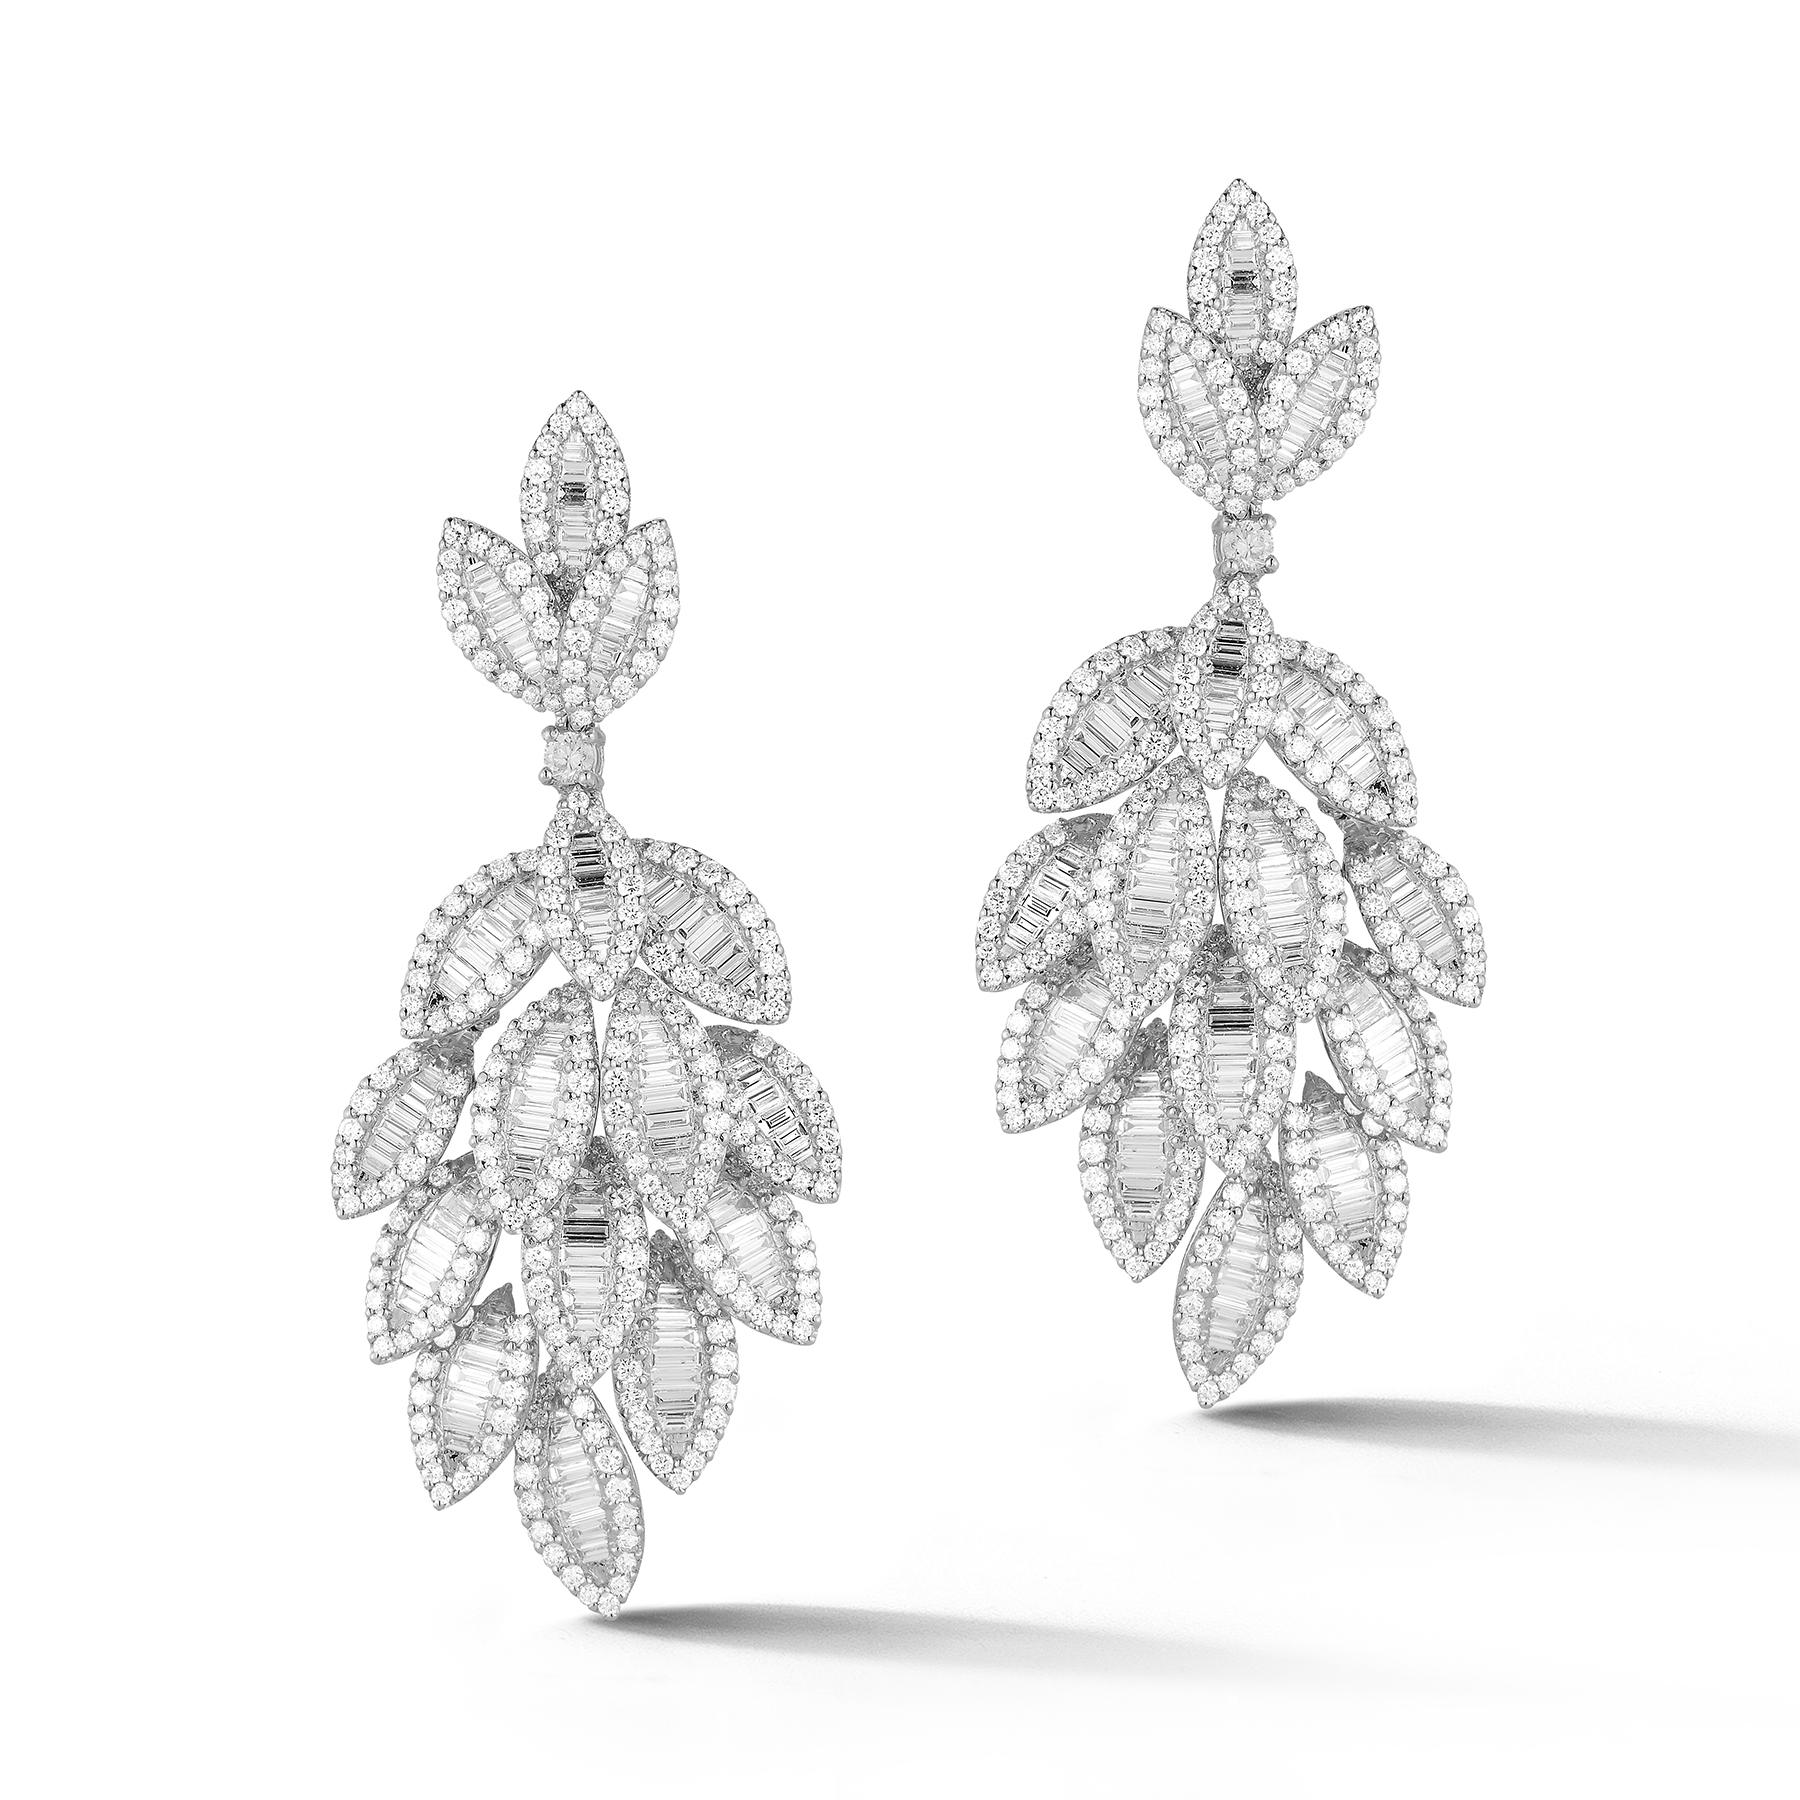 Stunning 18K White Gold Dangle Earrings in Dazzling Leaf-Shapes with 524 White Round Diamonds weighing 5.38 Carats and 207 White Baguette Diamonds weighing 4.56 Carats.